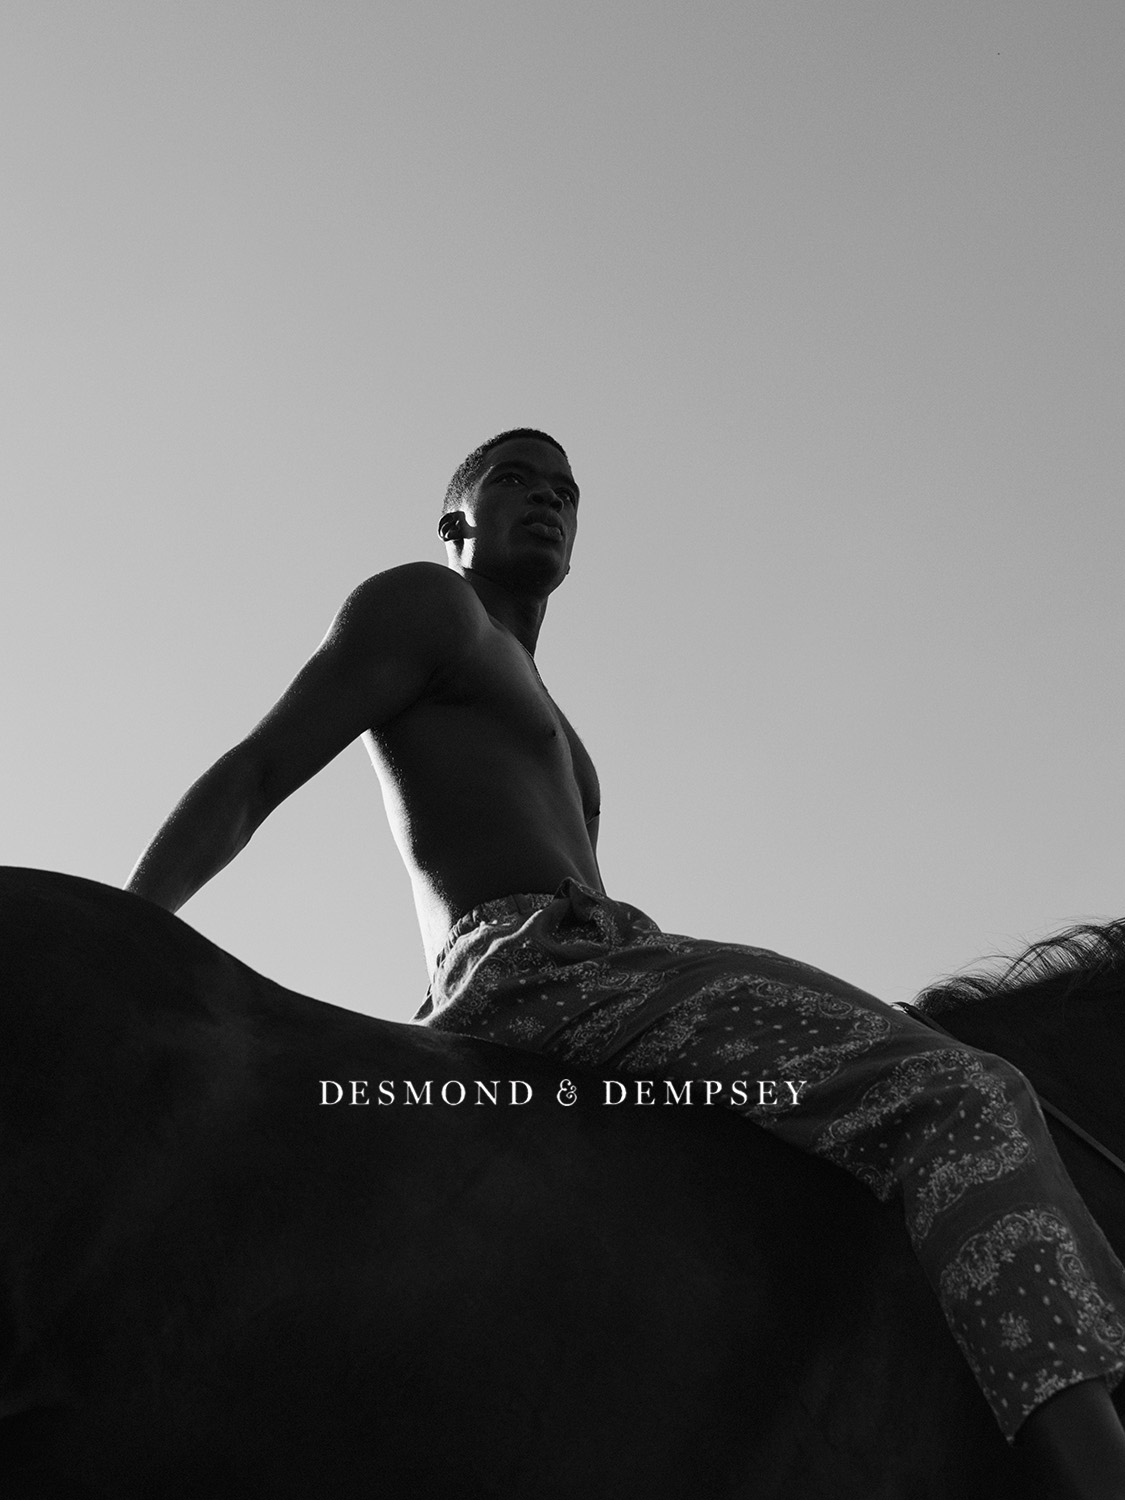 Desmond&Dempsey “home on the ranch”.